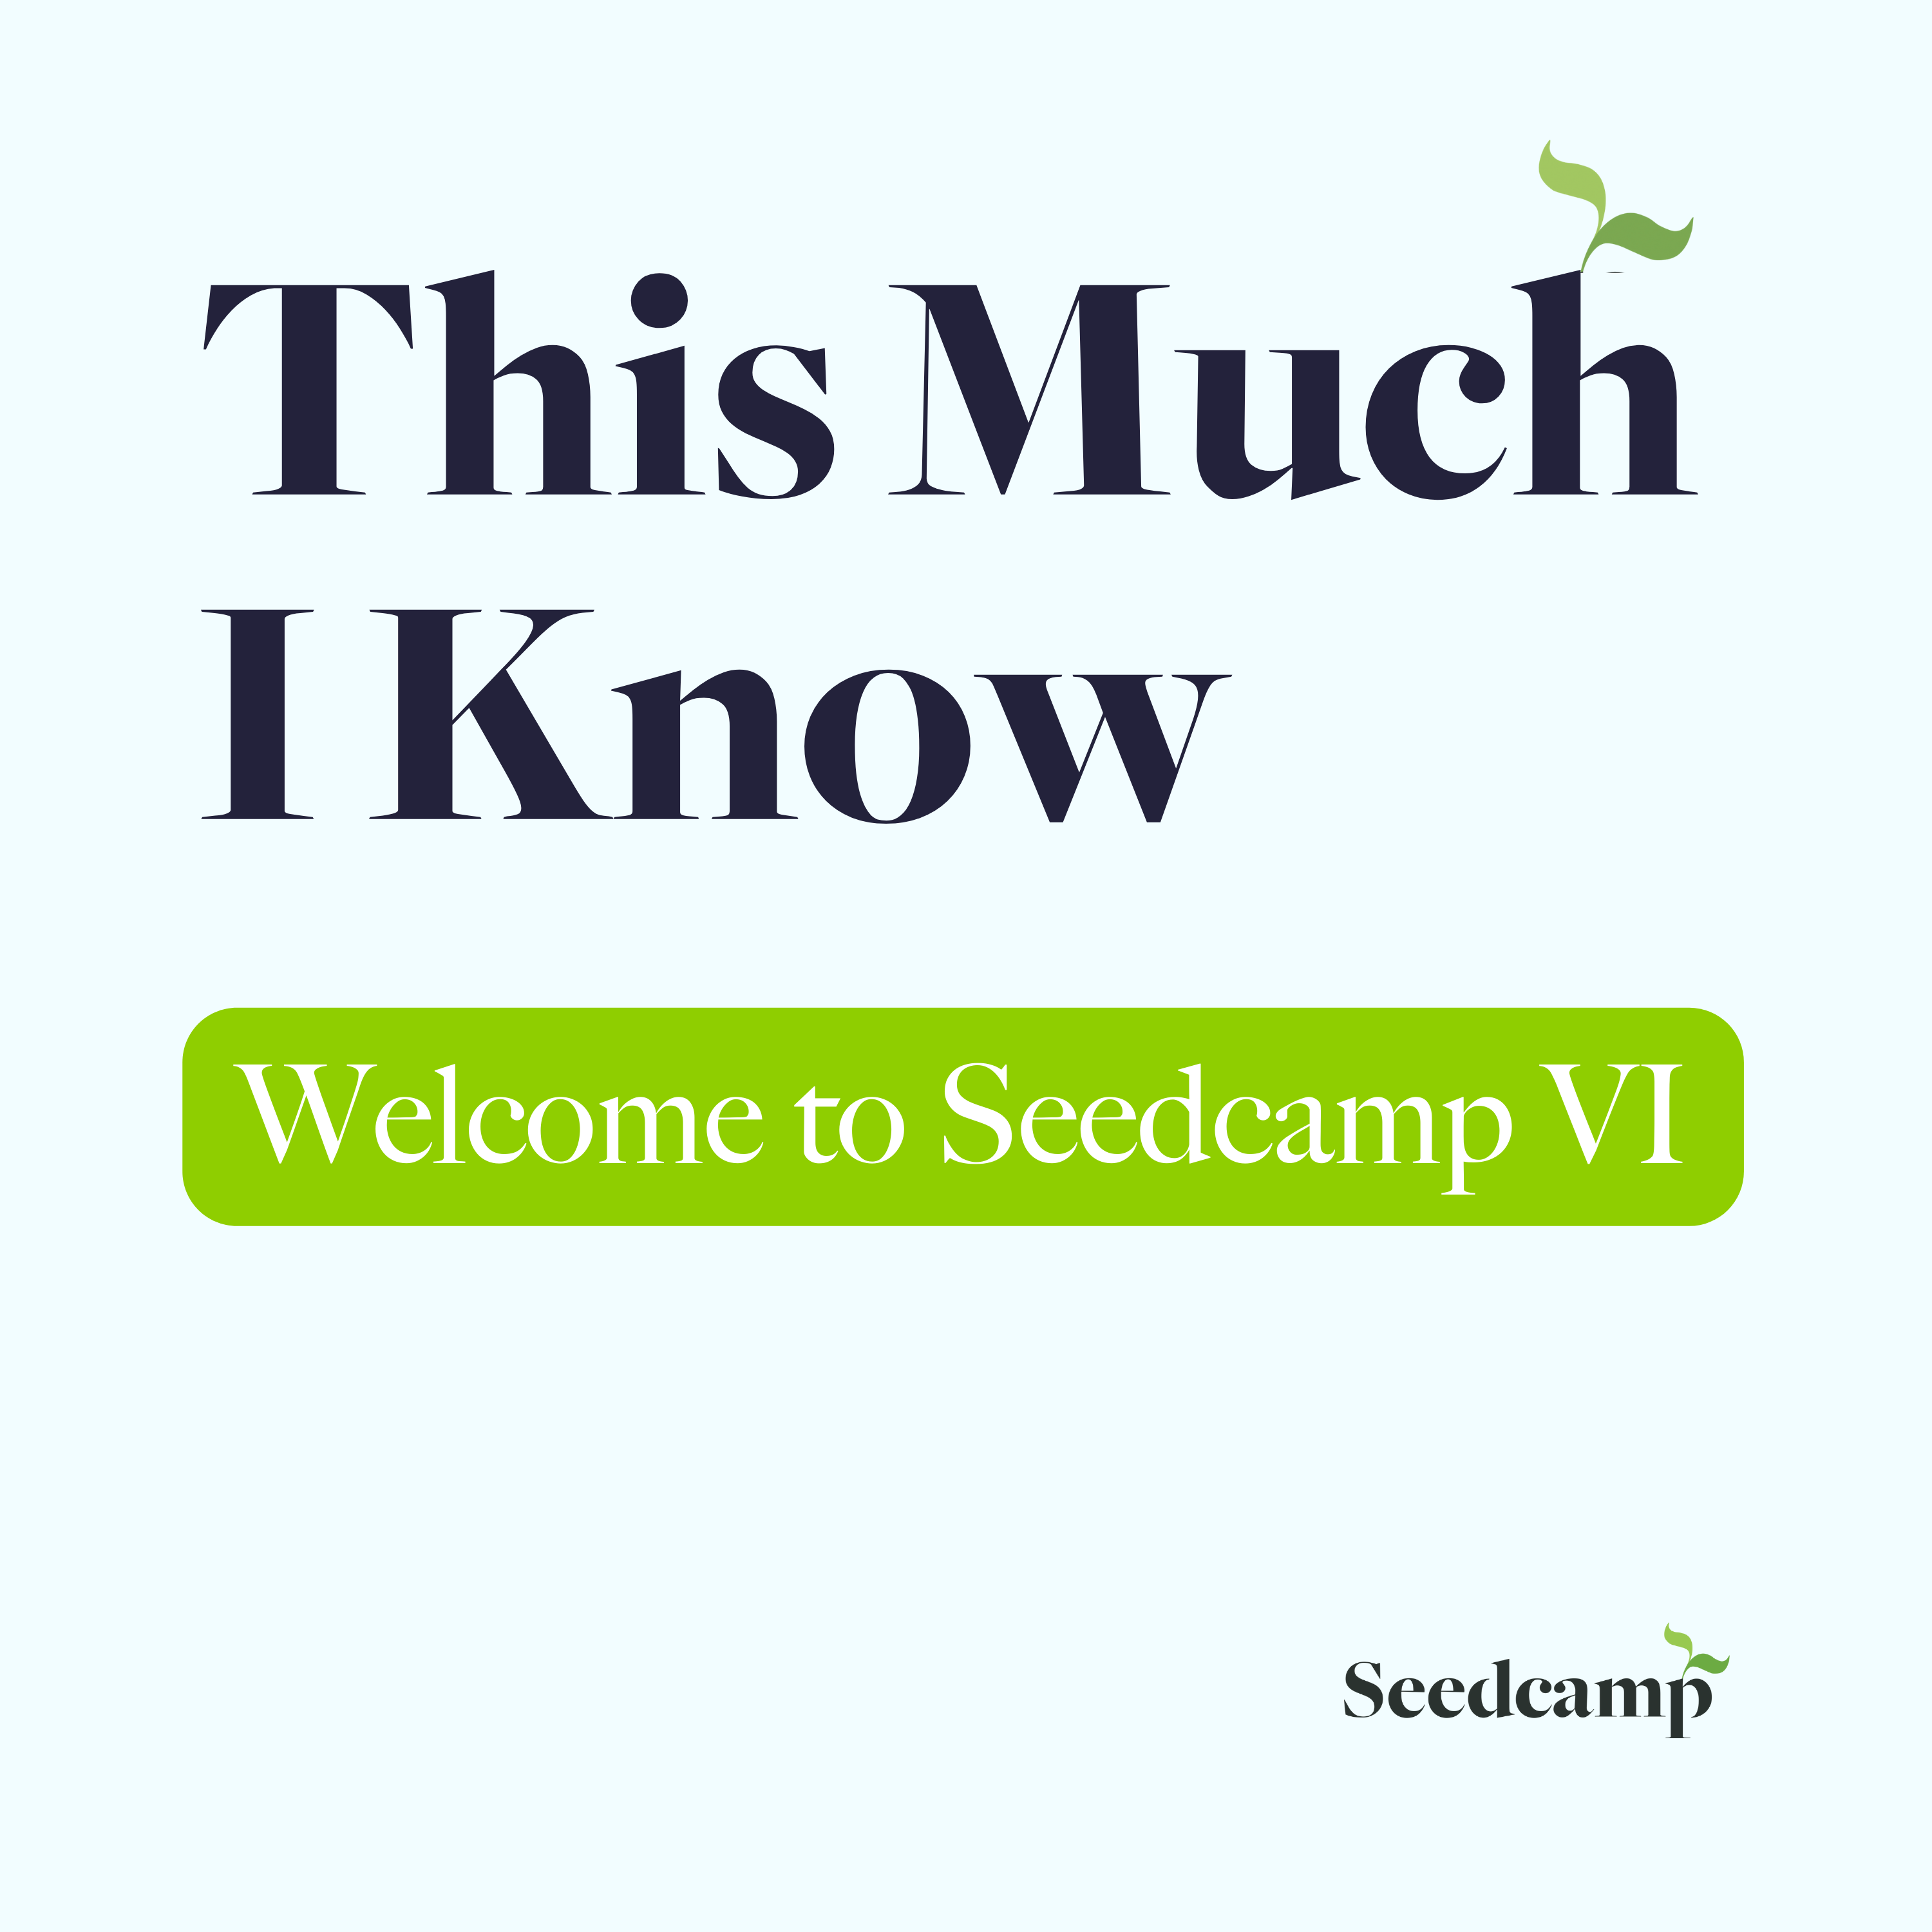 What you can expect from Seedcamp VI